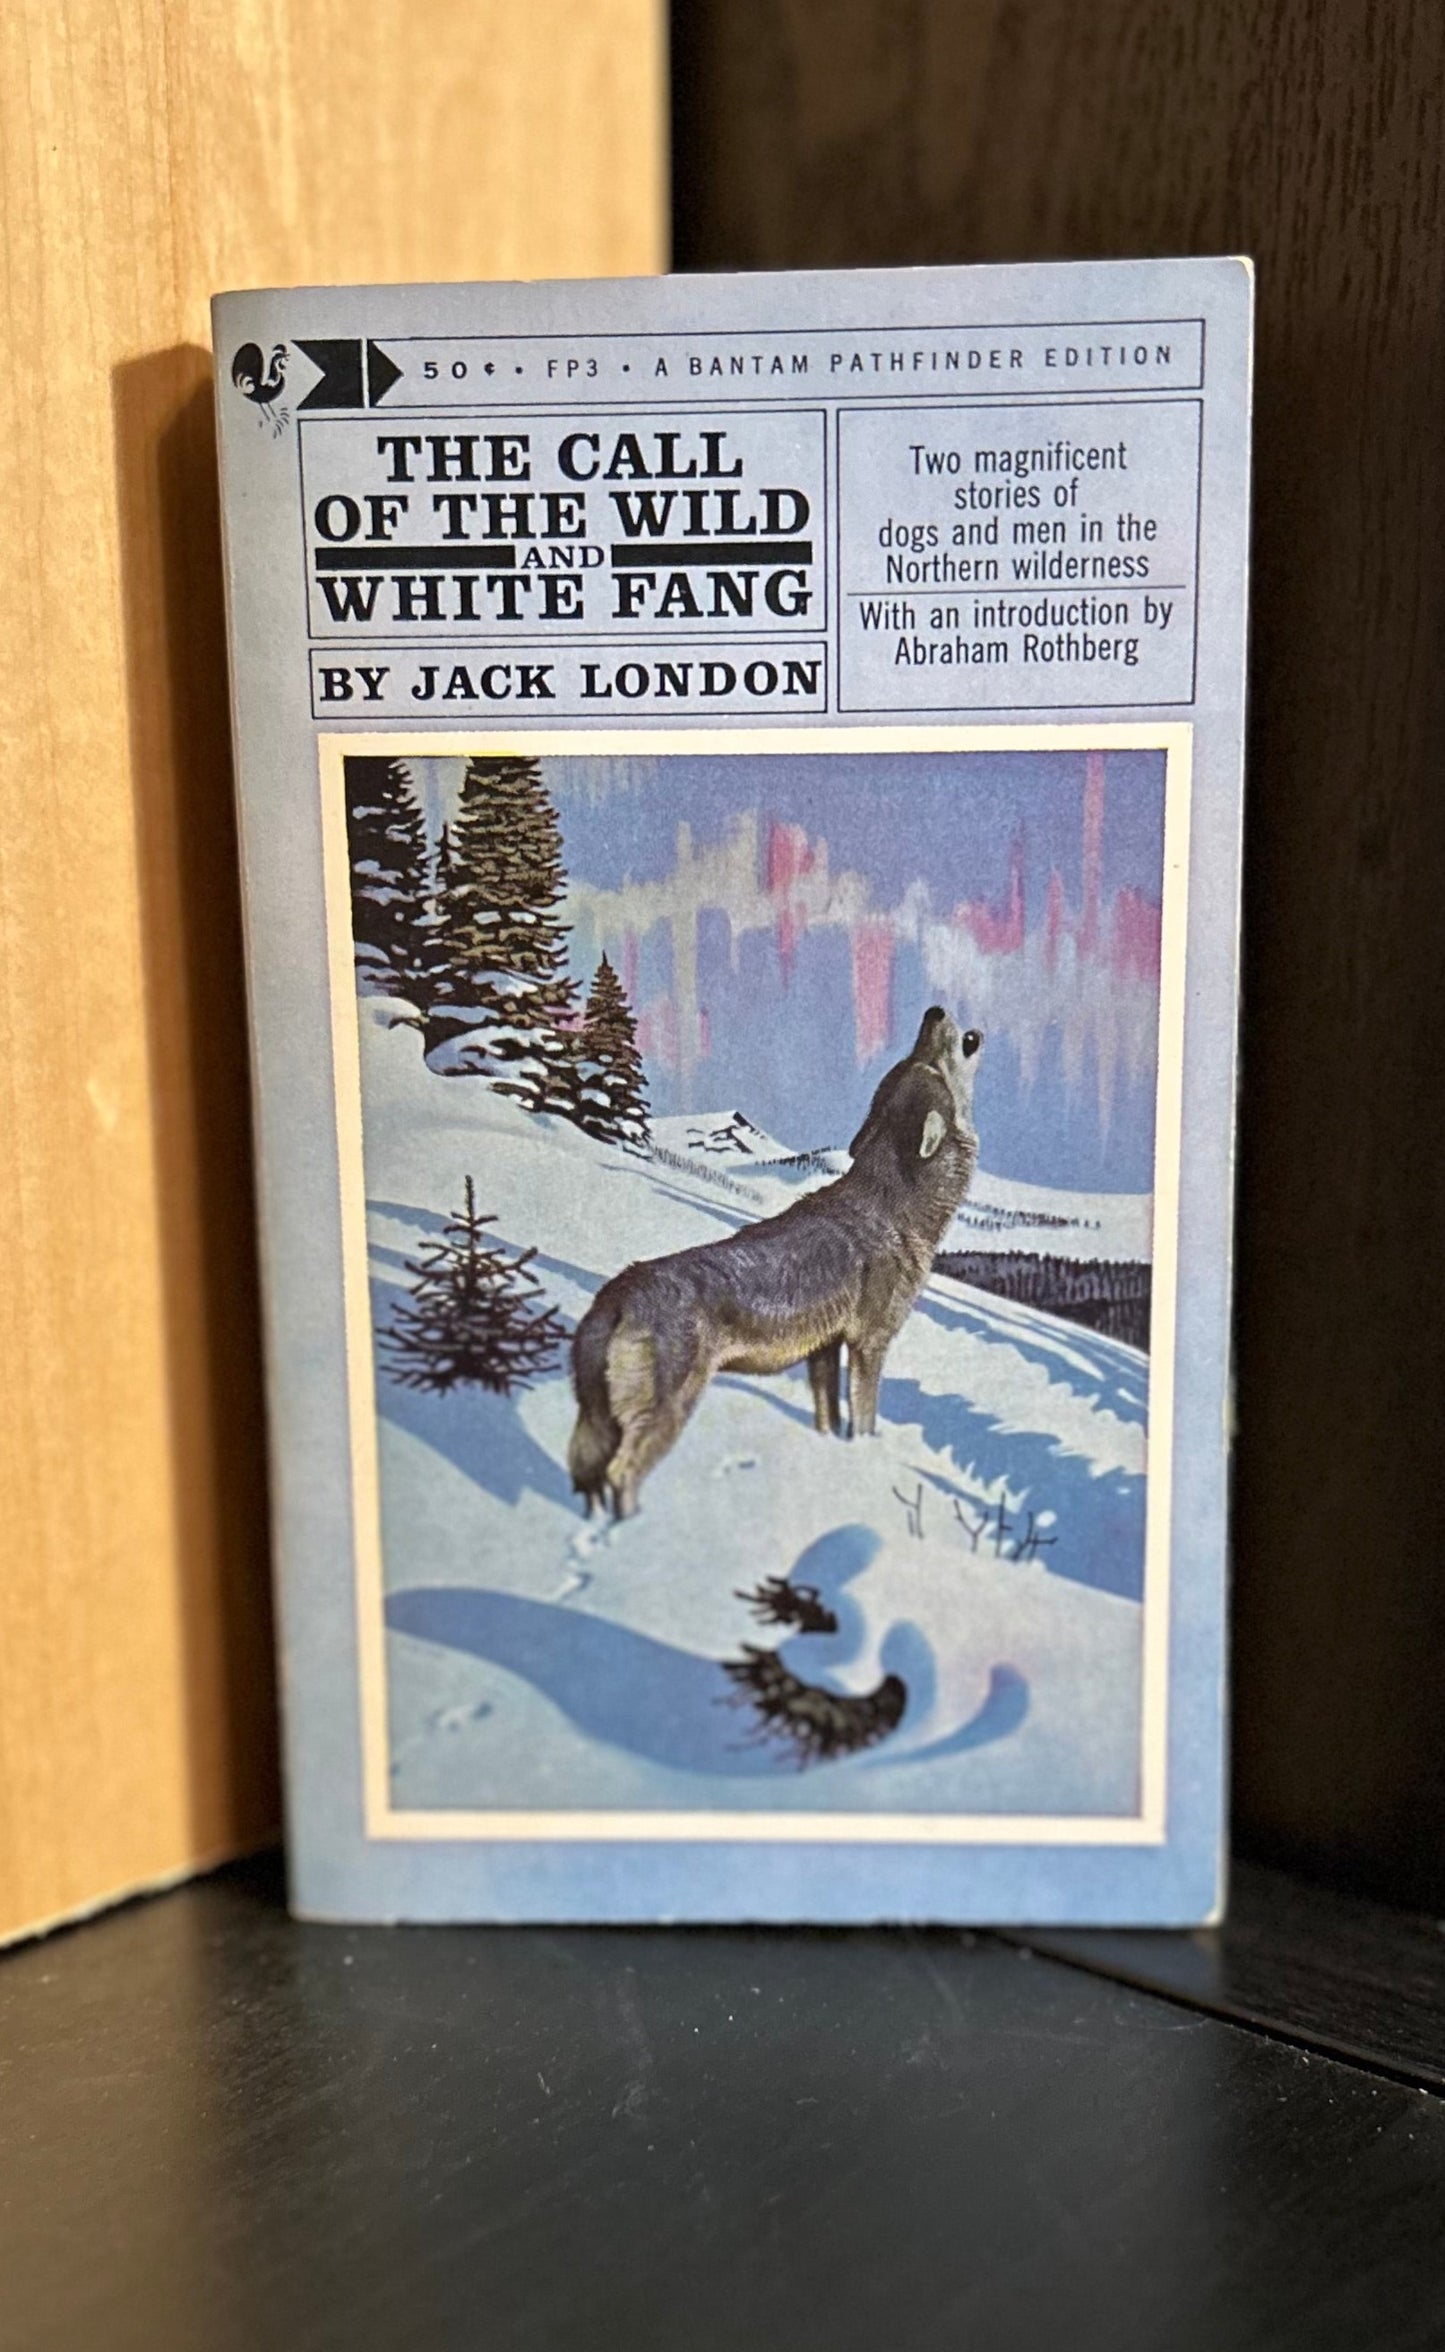 Call of the Wild and White Fang - Jack London